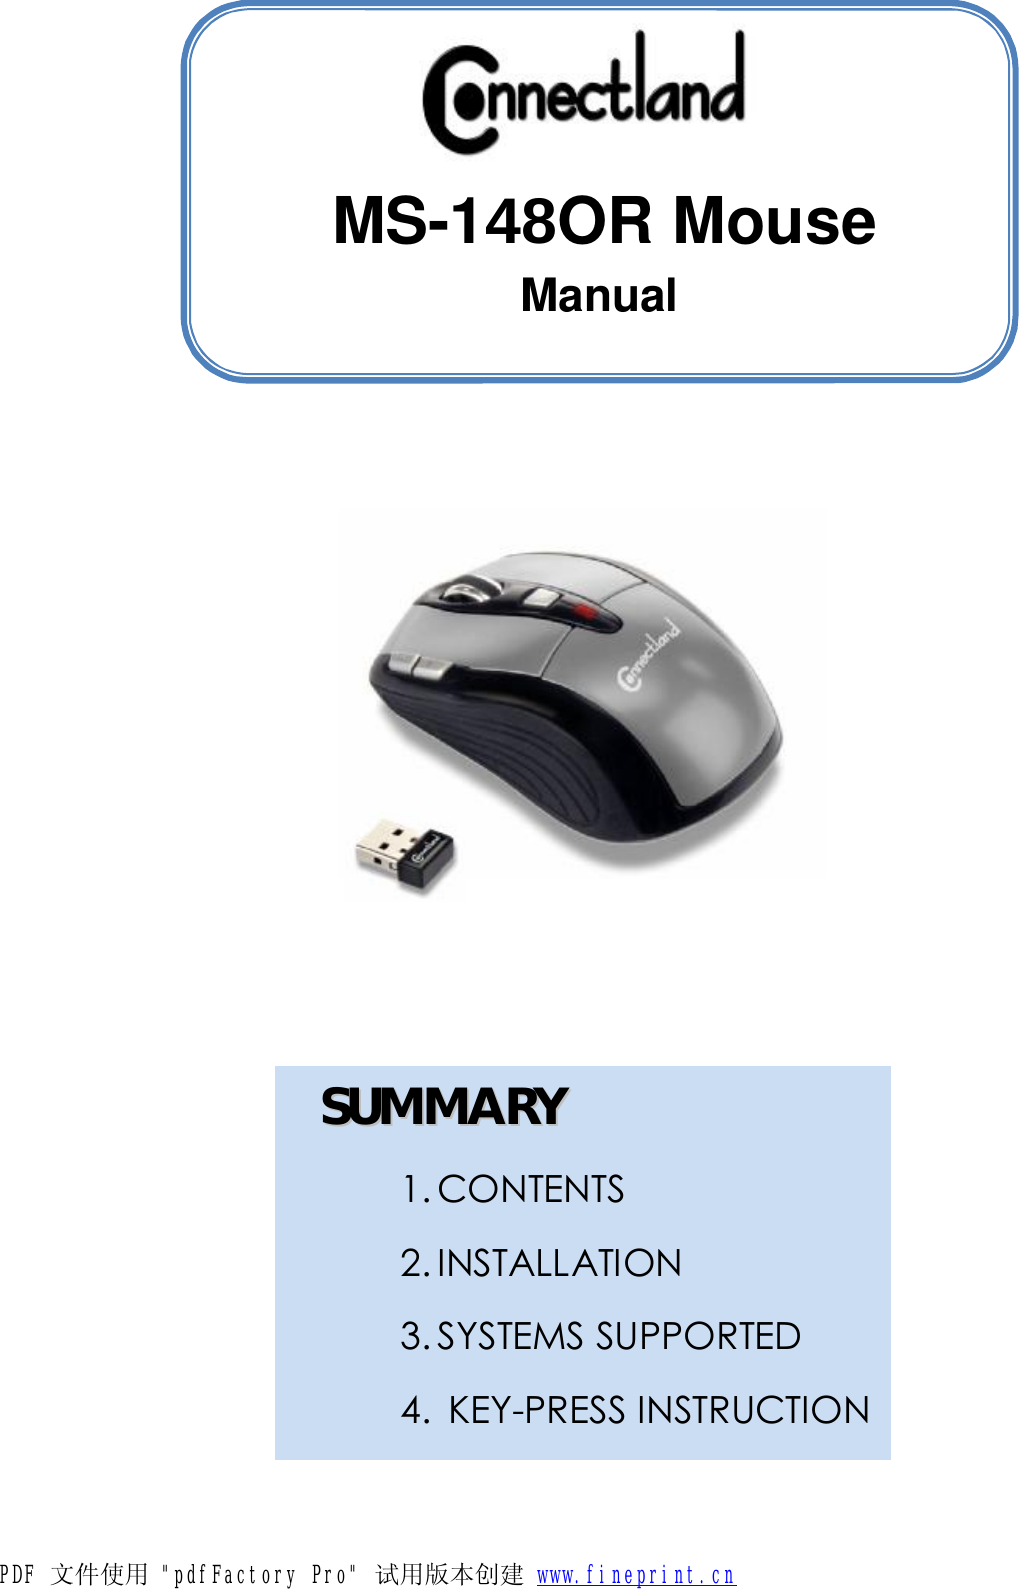                       MS-148OR Mouse Manual  SSUUMMMMAARRYY  1. CONTENTS 2. INSTALLATION 3. SYSTEMS SUPPORTED 4.  KEY-PRESS INSTRUCTION PDF 文件使用 &quot;pdfFactory Pro&quot; 试用版本创建           www.fineprint.cn